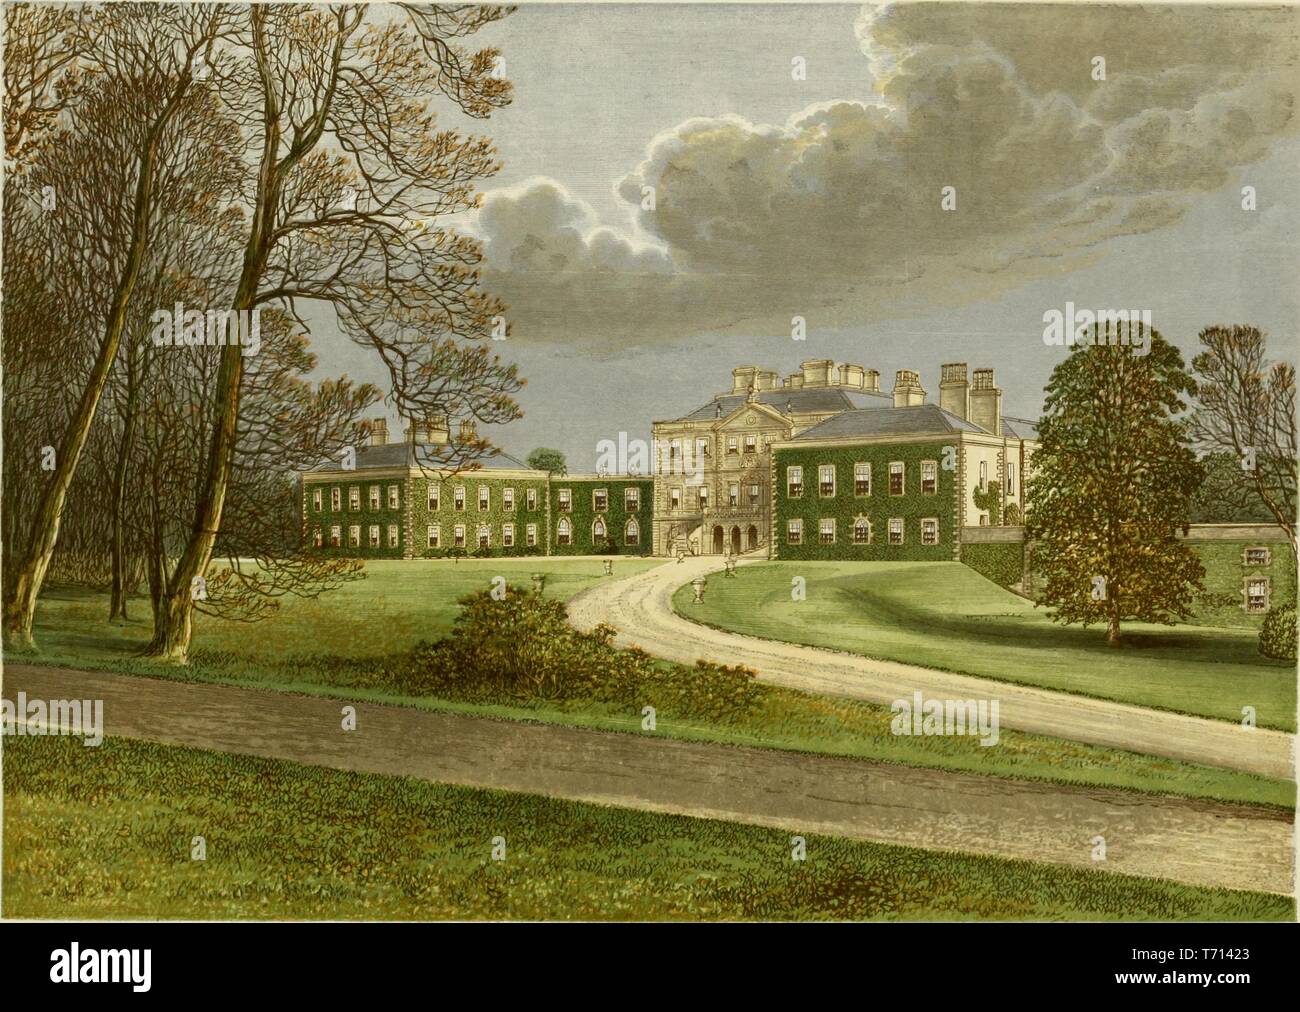 Color print depicting a rolling lawn with a curving path leading to Haddo House, an 18th-century stately home, with a vine-covered facade, designed in a Georgian-Palladian style by architect William Adam, located in Aberdeenshire, Scotland, published in FO (Francis Orpen) Morris's 'A series of picturesque views of seats of the noblemen and gentlemen of Great Britain and Ireland, with descriptive and historical letterpress', 1840. Courtesy Internet Archive. () Stock Photo